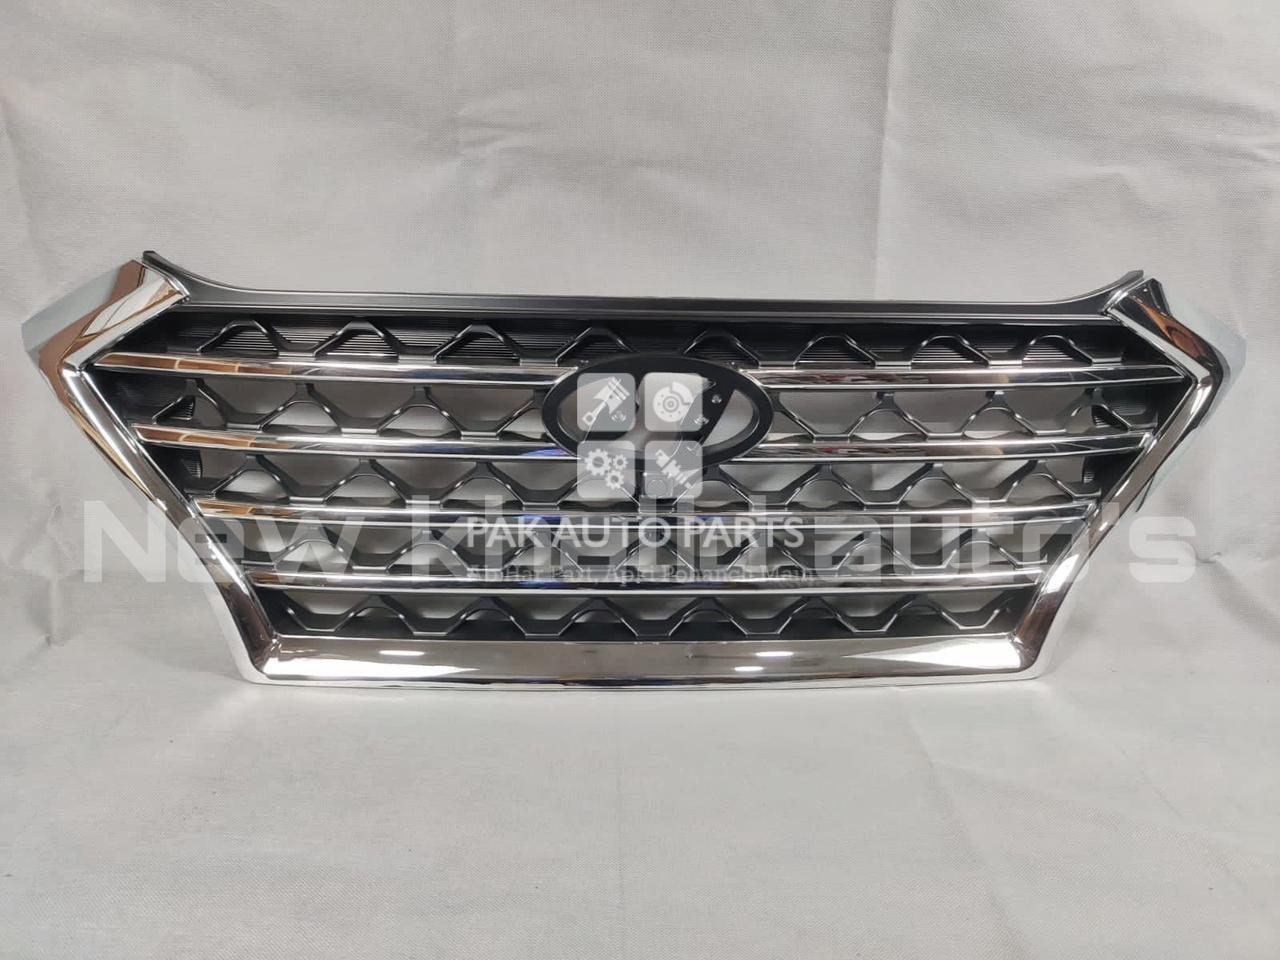 Picture of Hyundai Tucson 2019-22 Front Grille (Show grille)